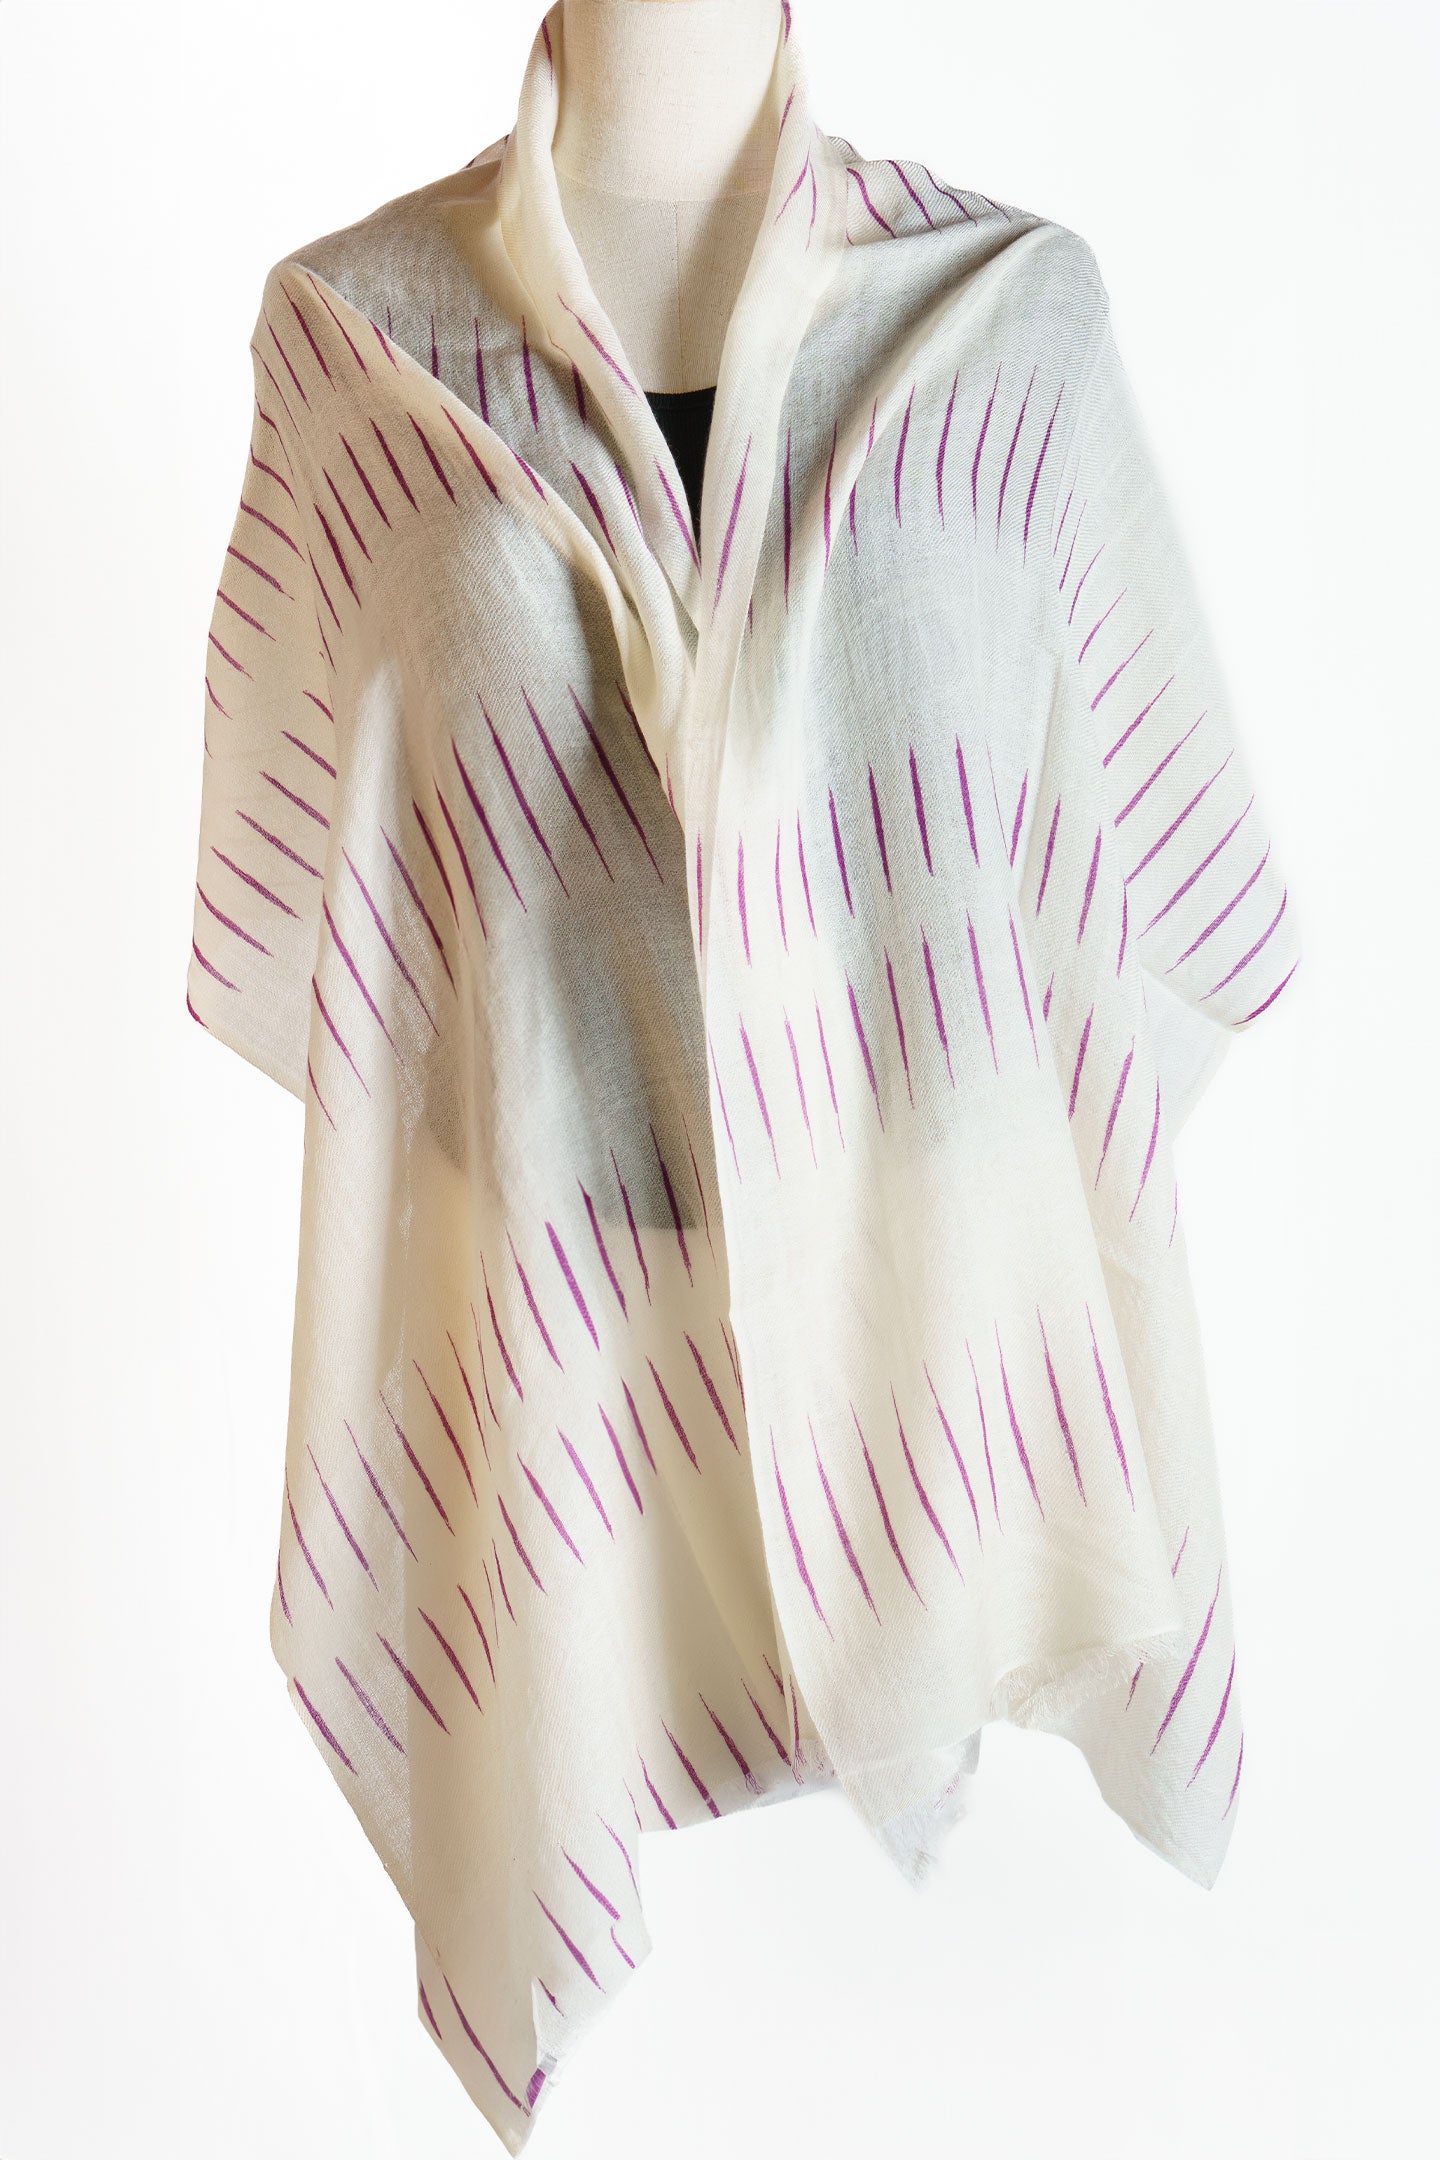 Hand Made Cashmere Scarf in Cream with Crimson